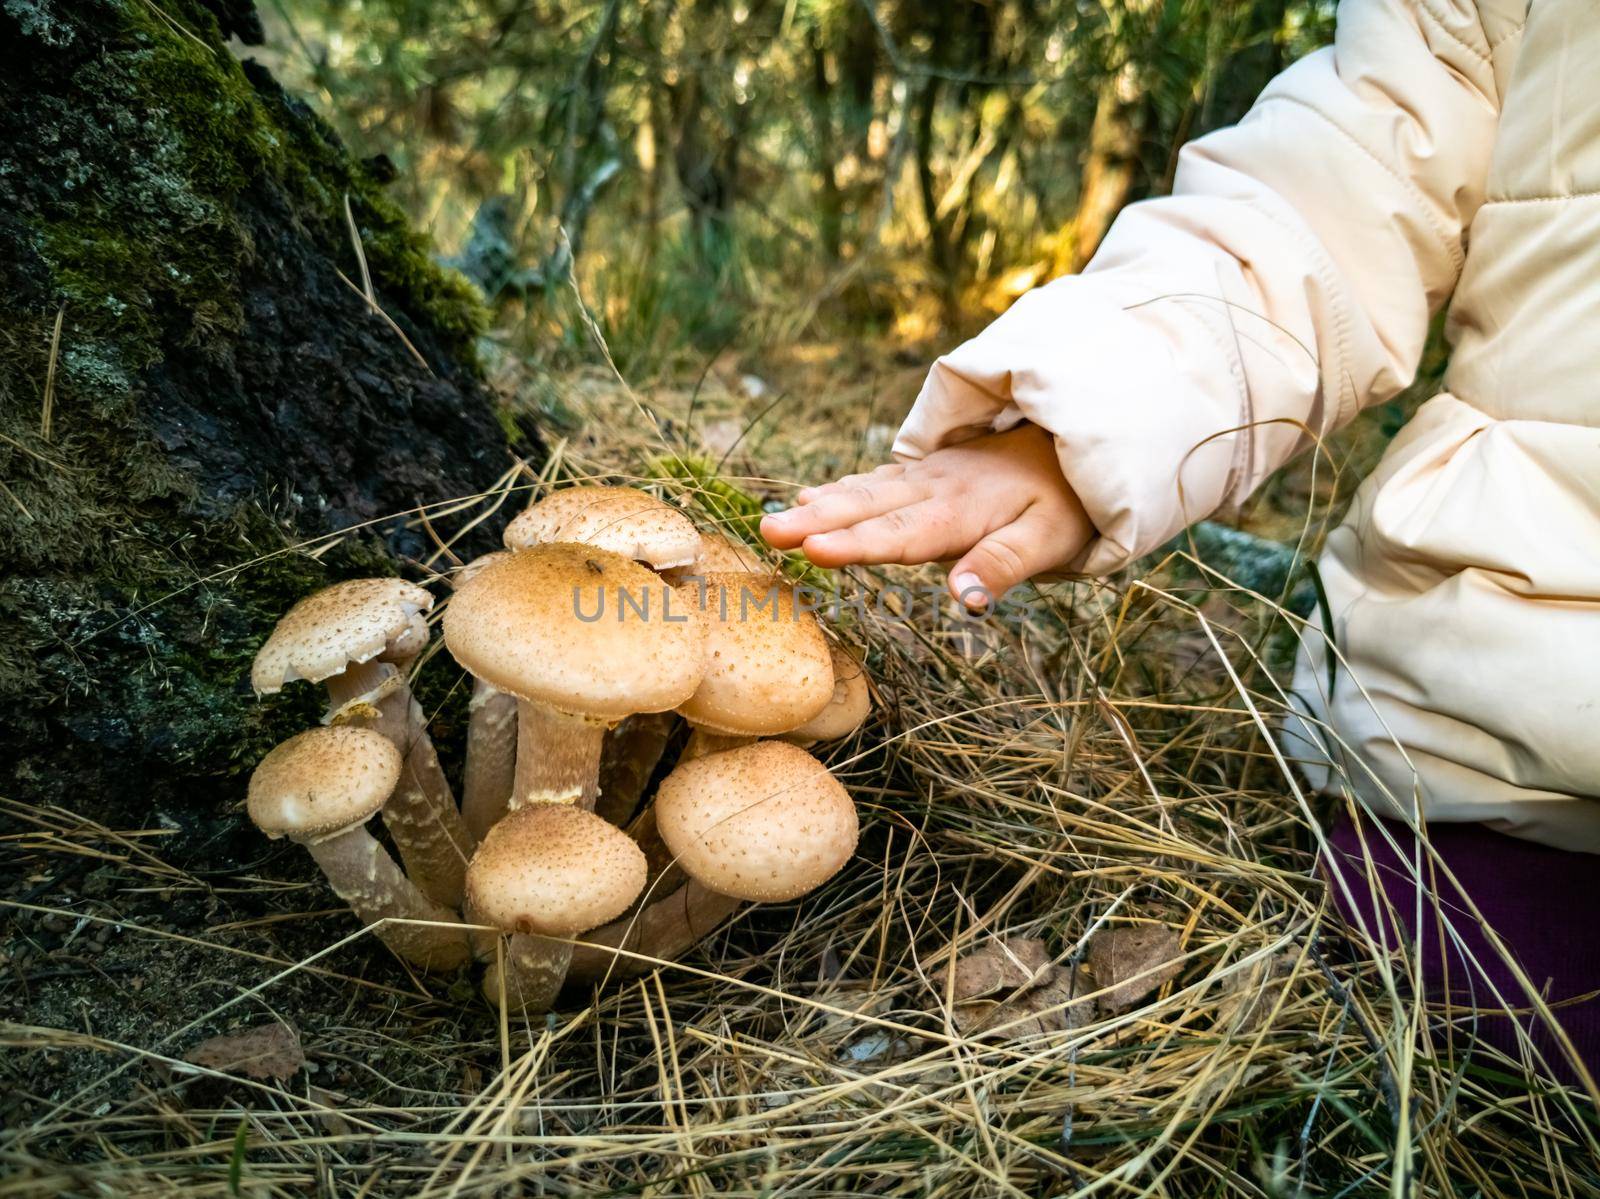 baby collecting honey mushrooms in the autumn forest. close-up no face. beautiful edible mushrooms in sunlight by Mariaprovector